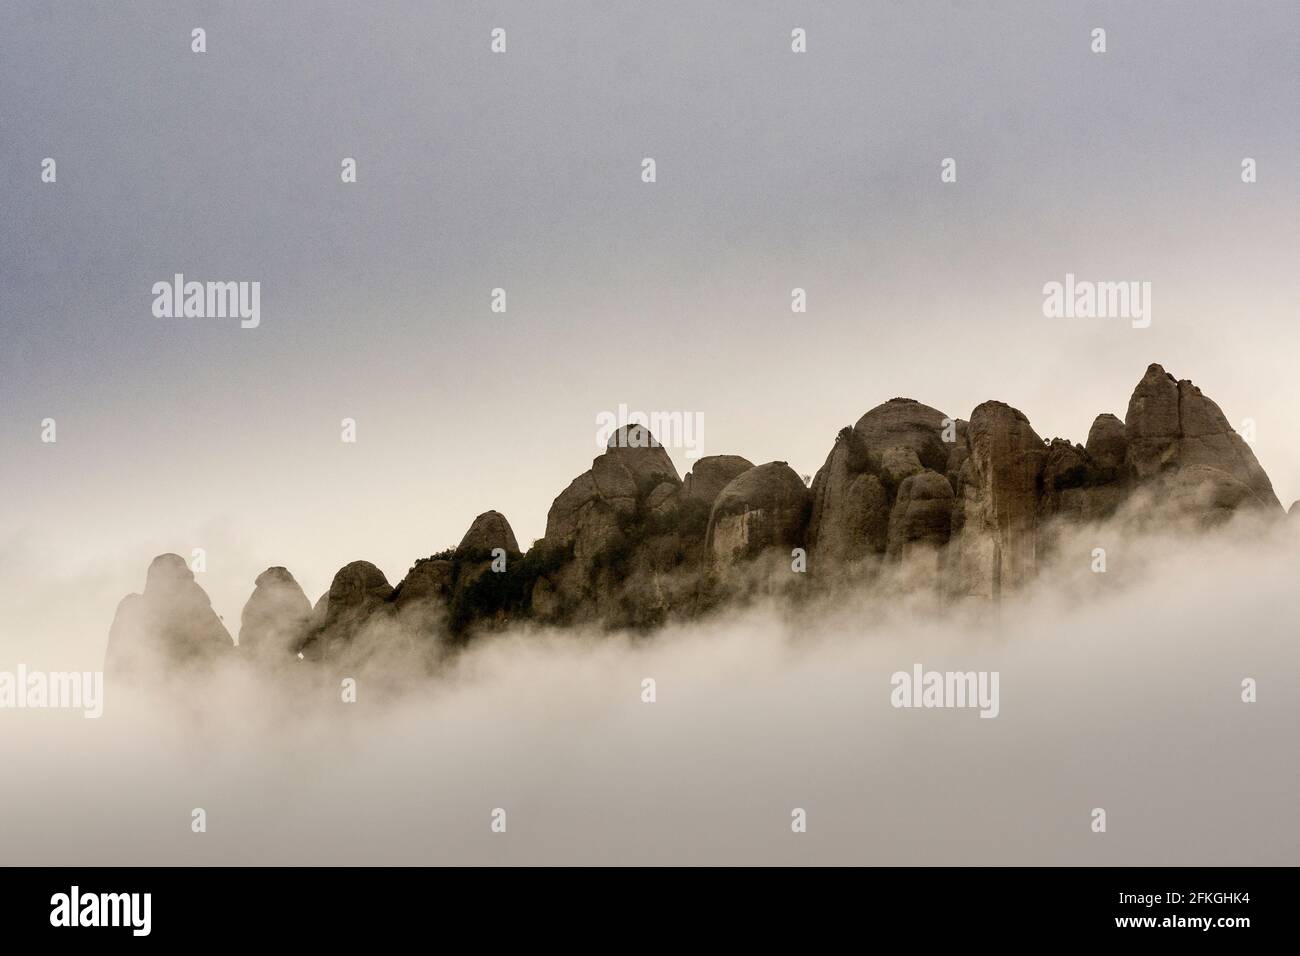 Rising clouds and mist obscure the peaks of Catalonia’s most famous natural landmark in the early morning after some heavy rainfall, resulting in moisture engulfing the peaks of the Montserrat mountain range, west of Barcelona in the province of Catalonia, Spain. © Olli Geibel Stock Photo